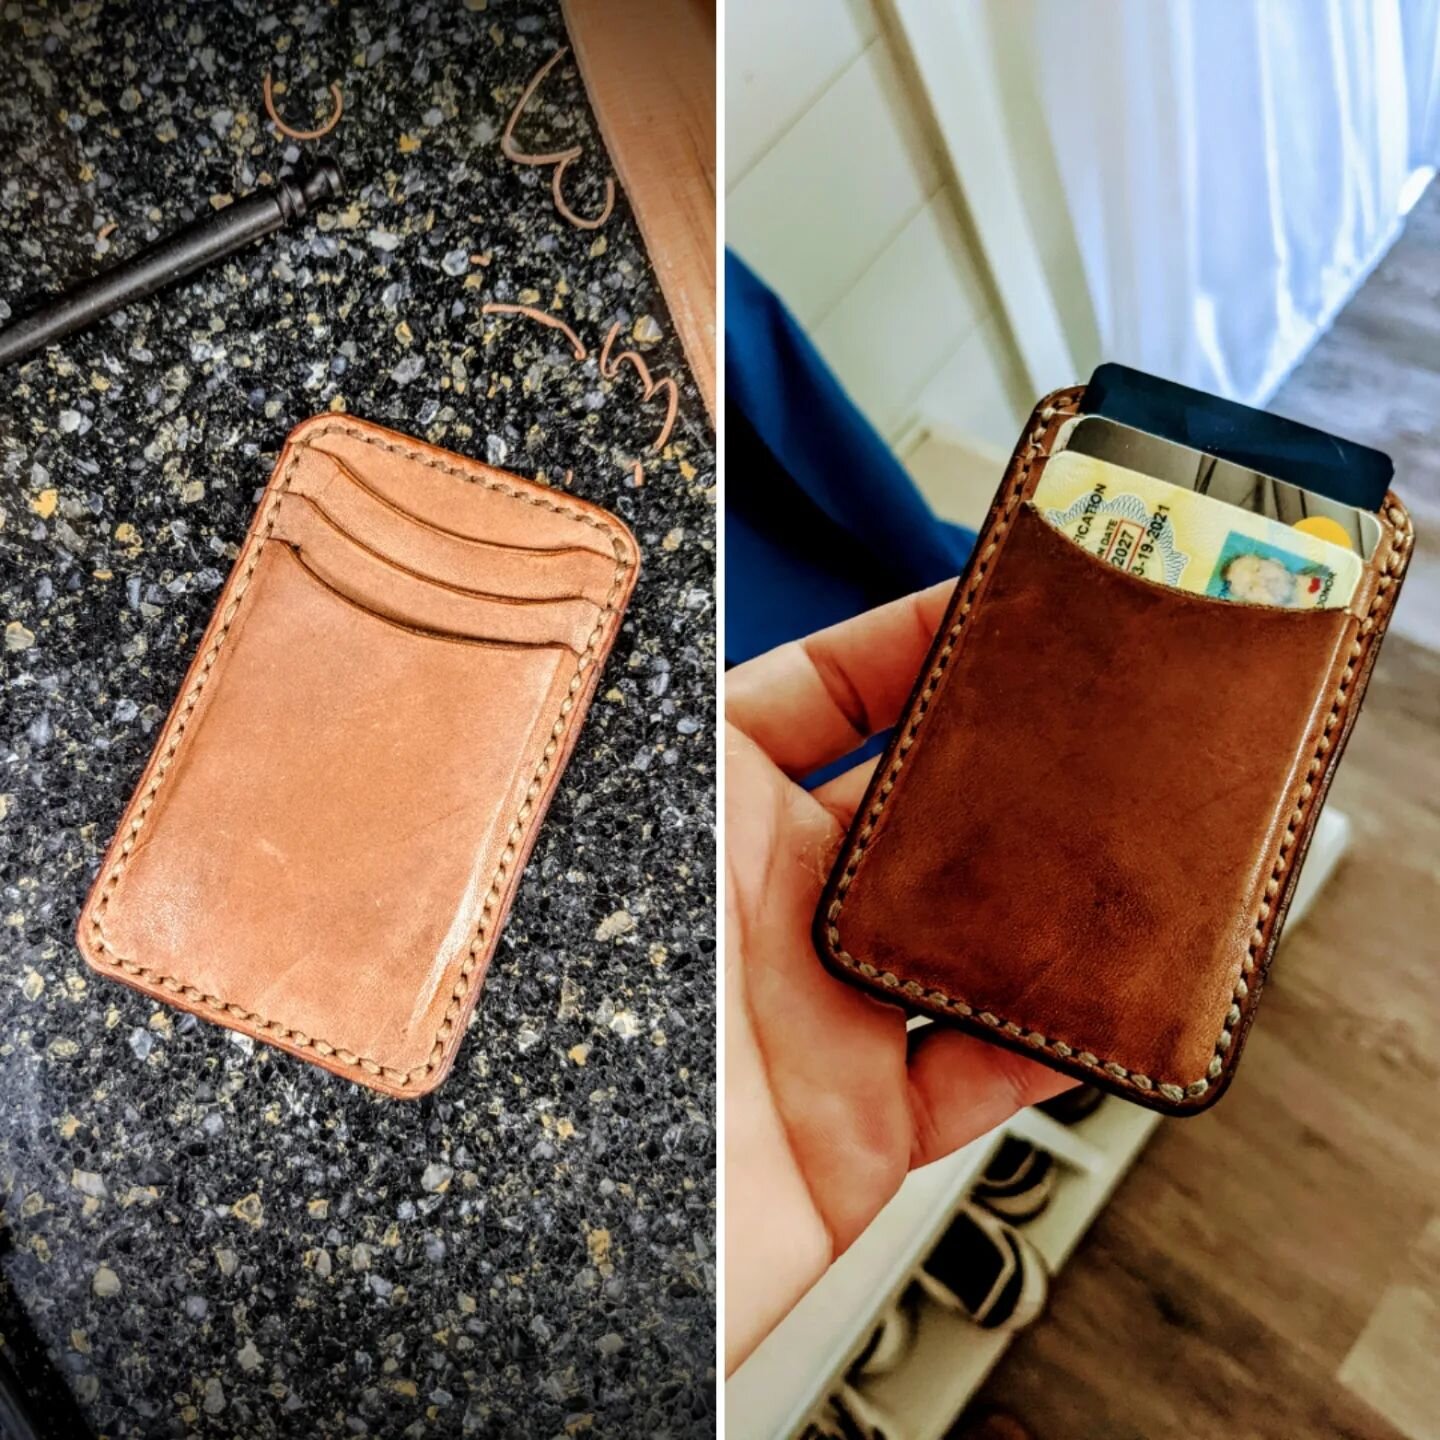 1 year of natural patina on this little card wallet I made for myself last summer. Lots of folks go for dyed and oil tanned leather goods but man the beautiful aging you get from clean unadulterated vegtan is like no other. 👌

#leather 
#leathercraf